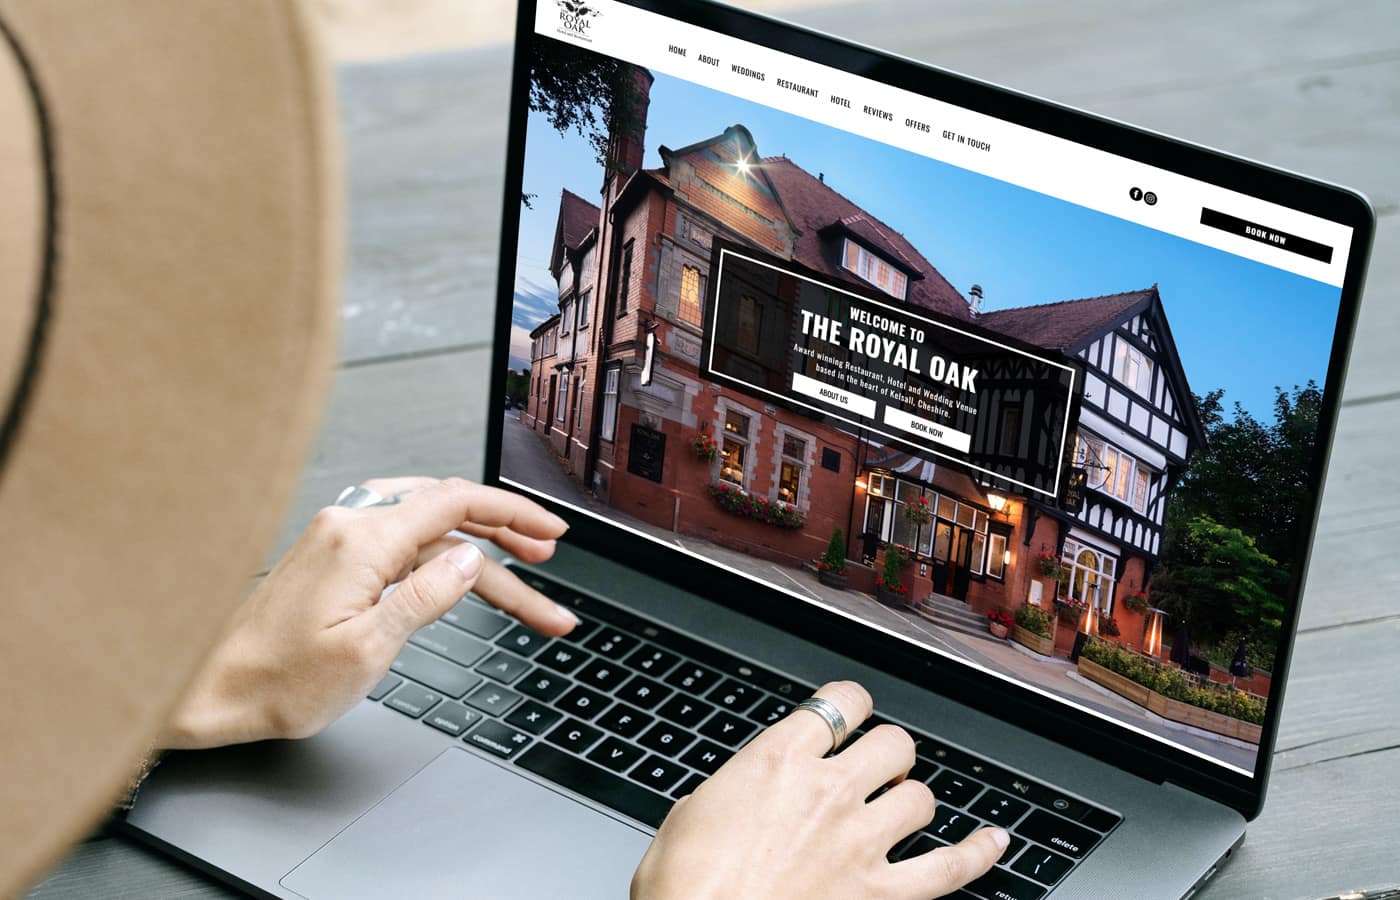 The Royal Oak - Web Design and Hosting and Print, Kelsall, Cheshire